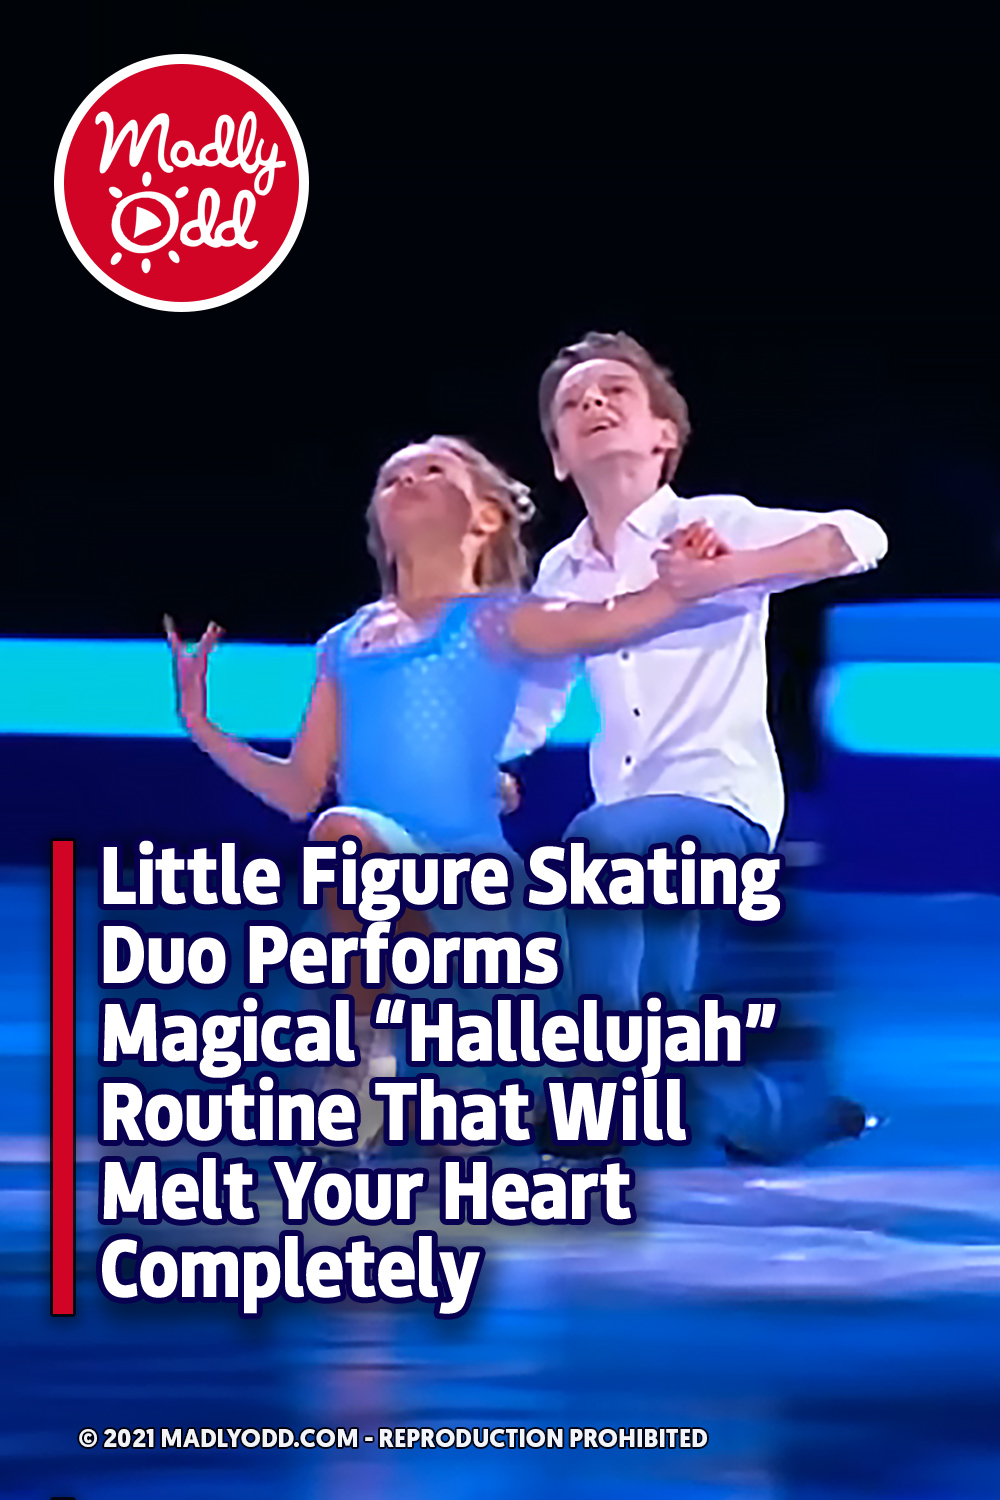 Little Figure Skating Duo Performs Magical “Hallelujah” Routine That Will Melt Your Heart Completely